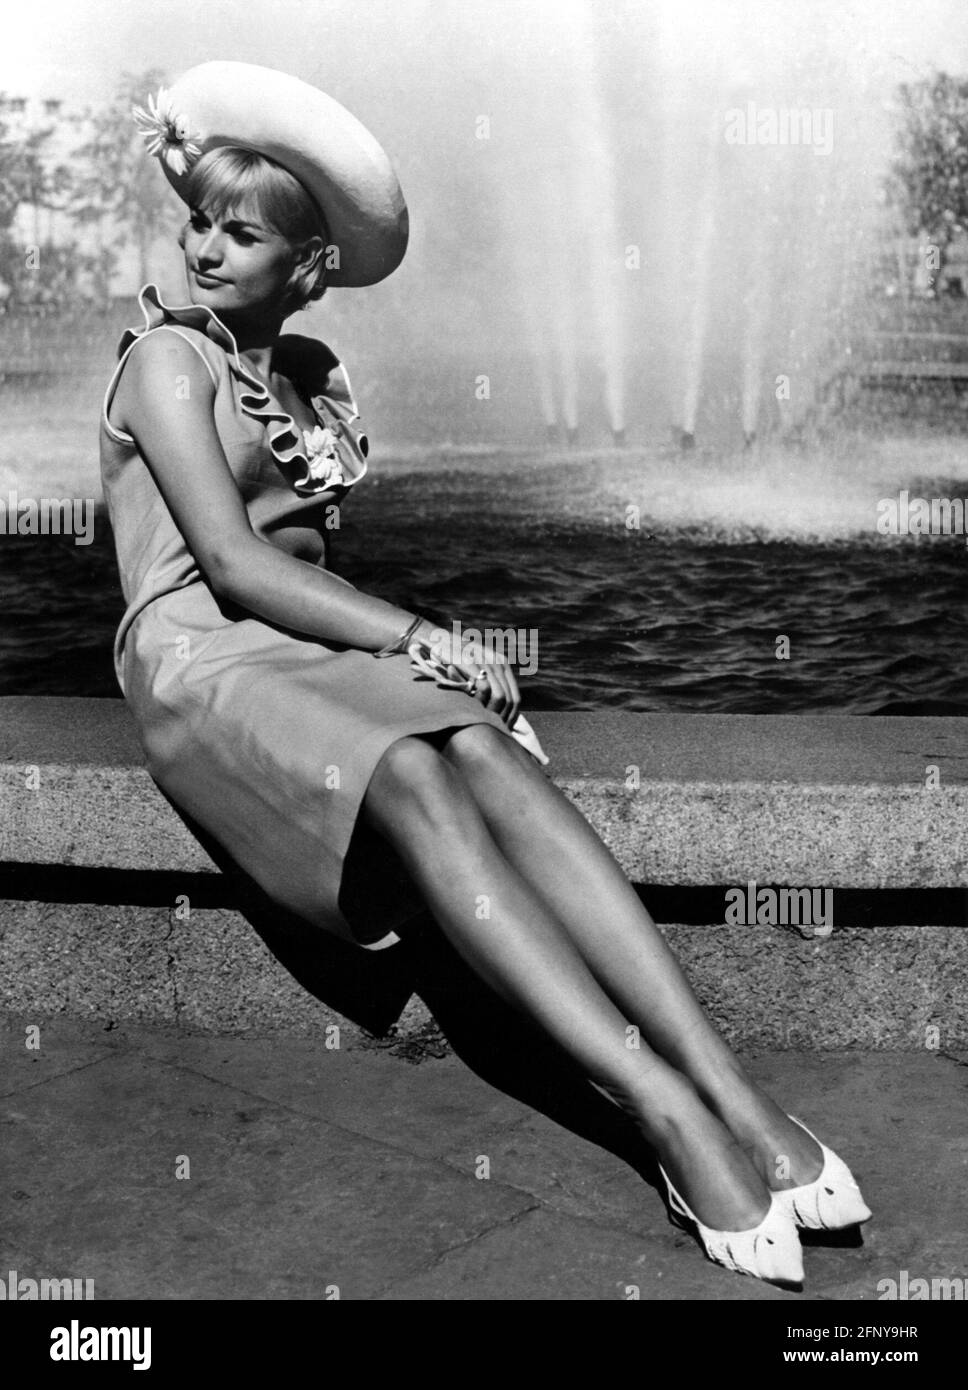 fashion, 1960s, ladies' fashion, model posing at fountain, ADDITIONAL-RIGHTS-CLEARANCE-INFO-NOT-AVAILABLE Stock Photo